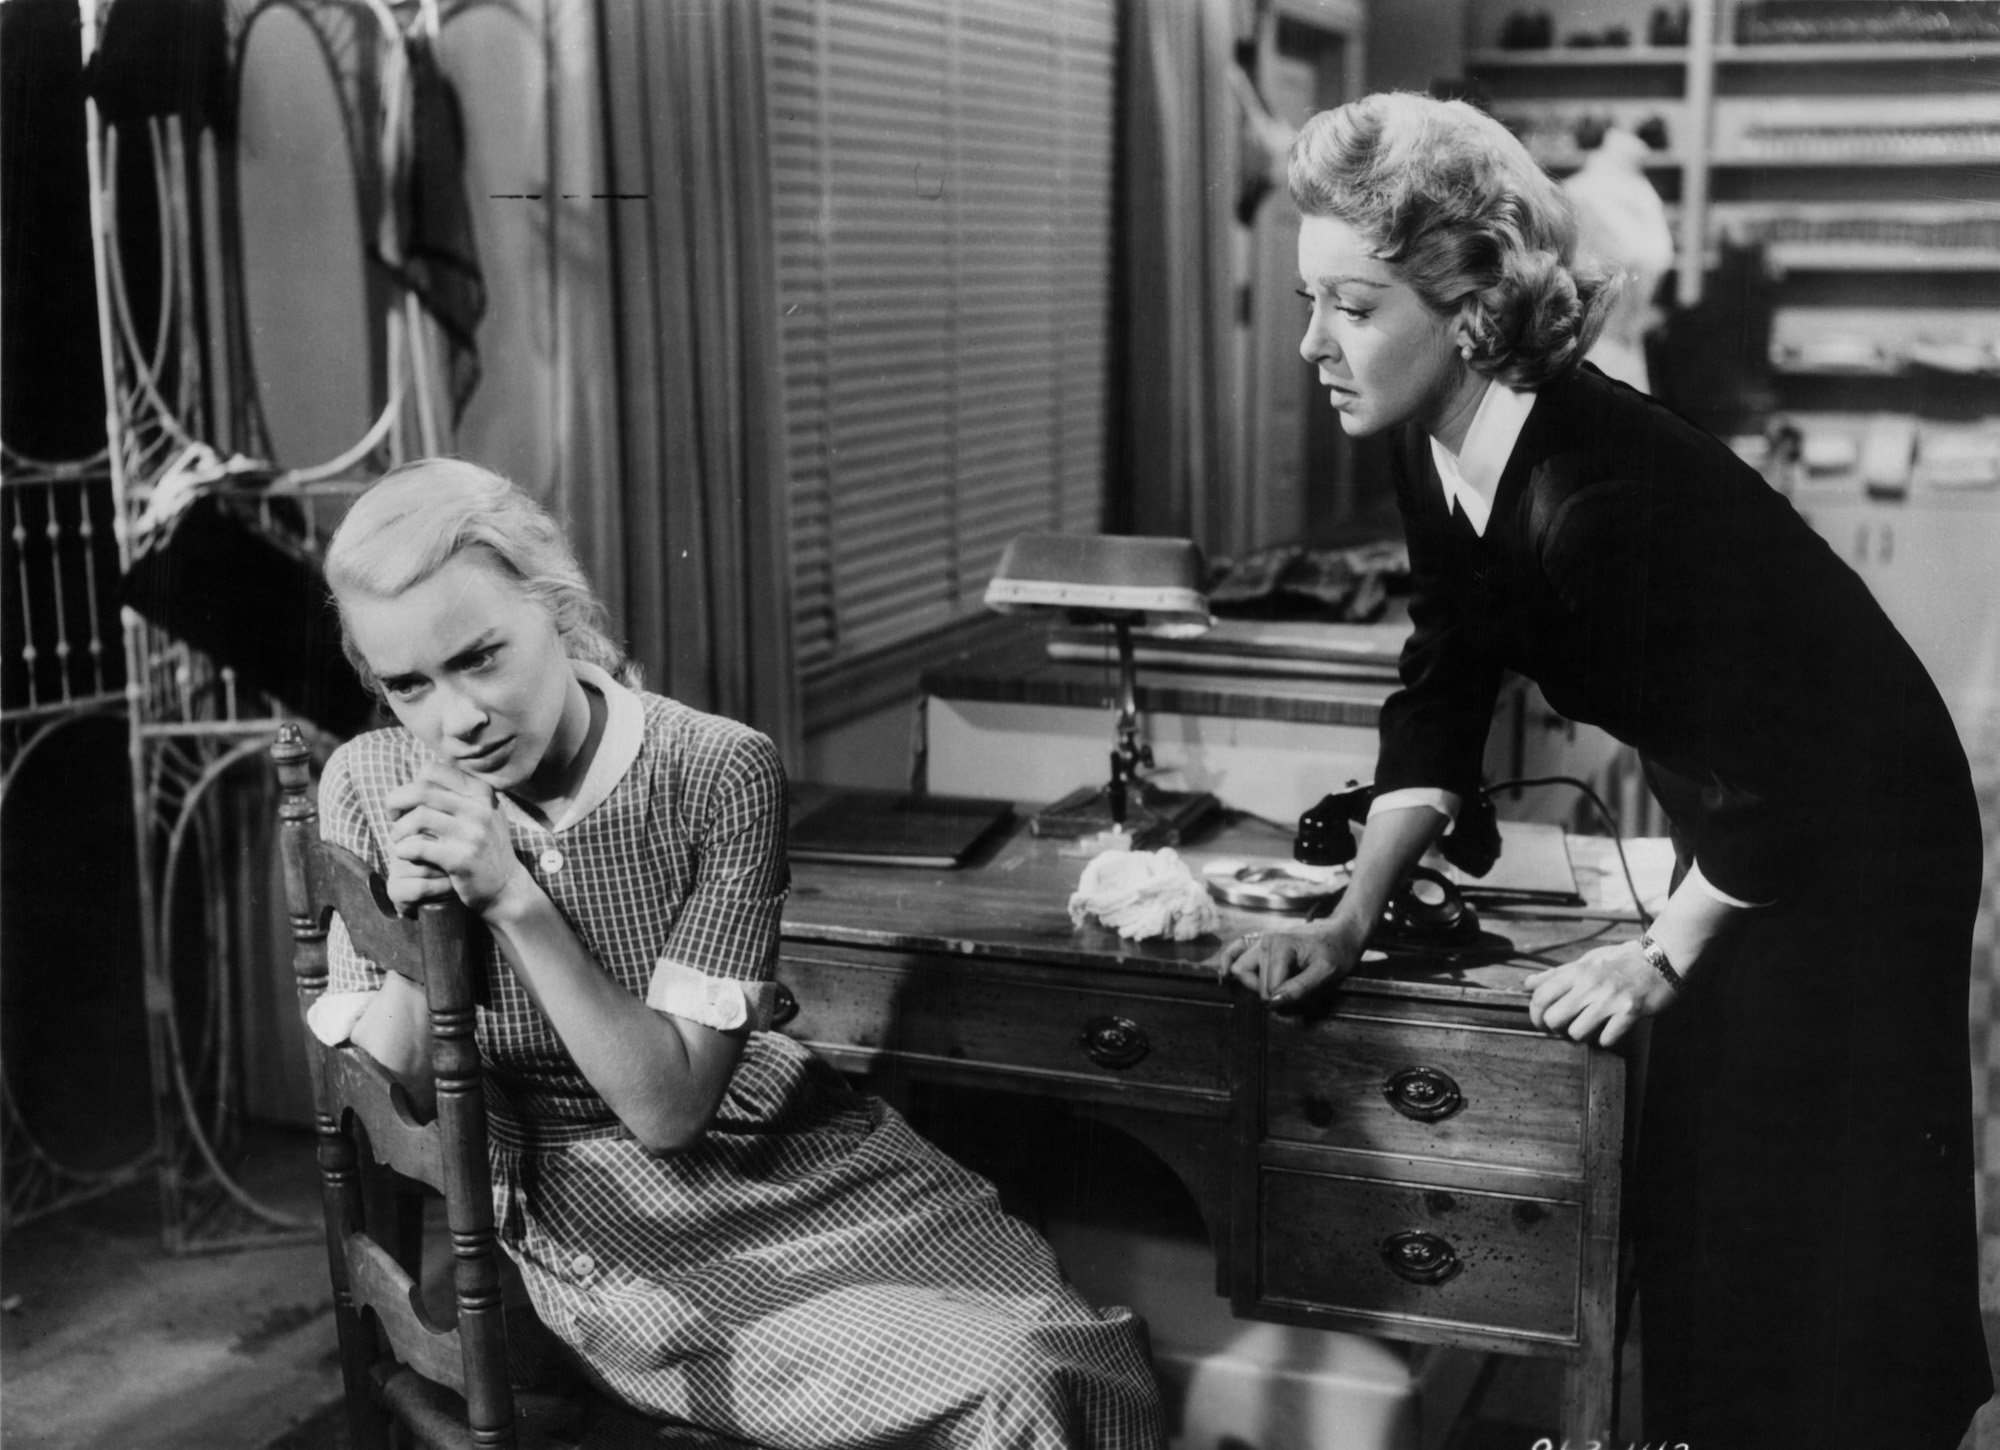 (L-R) Hope Lange sitting on a chair and Lana Turner checking on her in 'Peyton Place' (black and white)